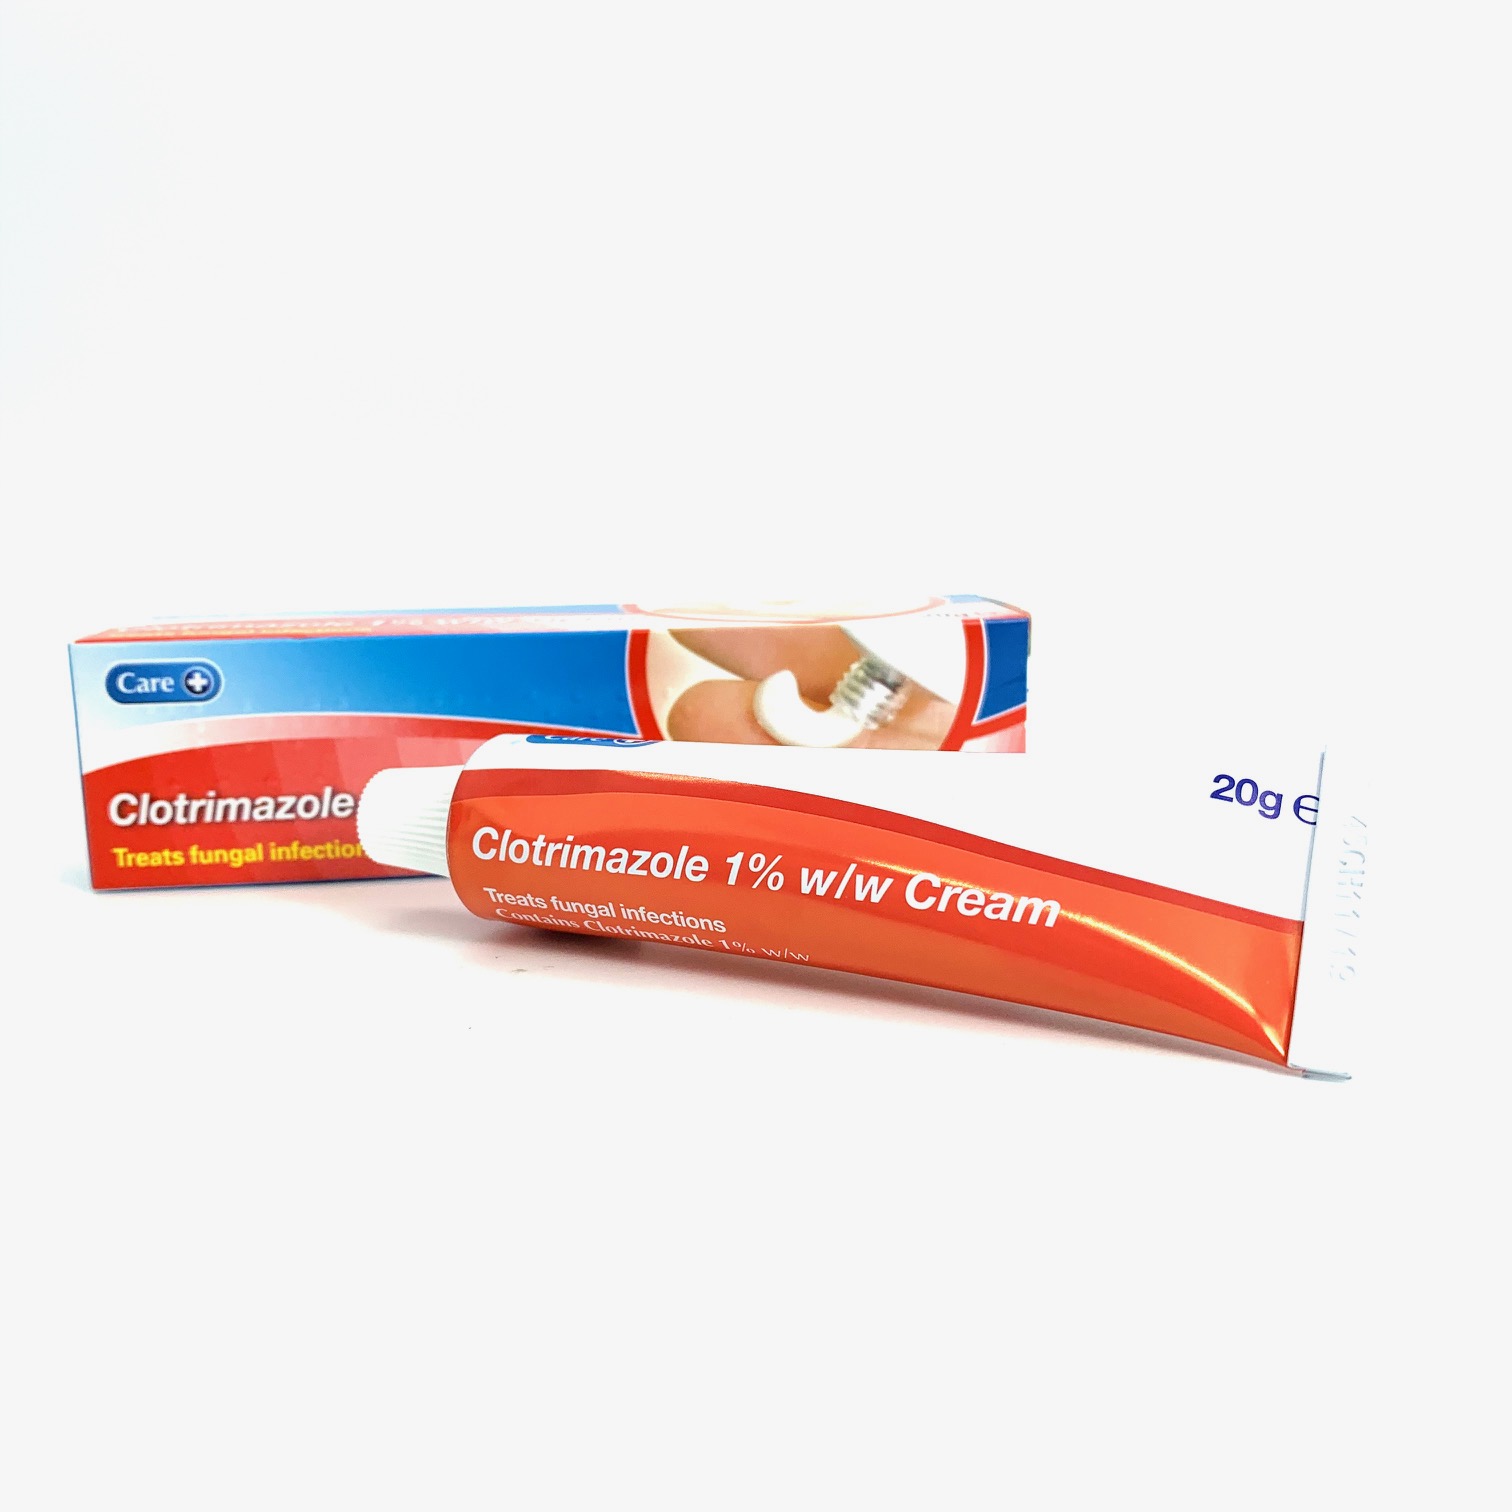 is clotrimazole cream safe for dogs